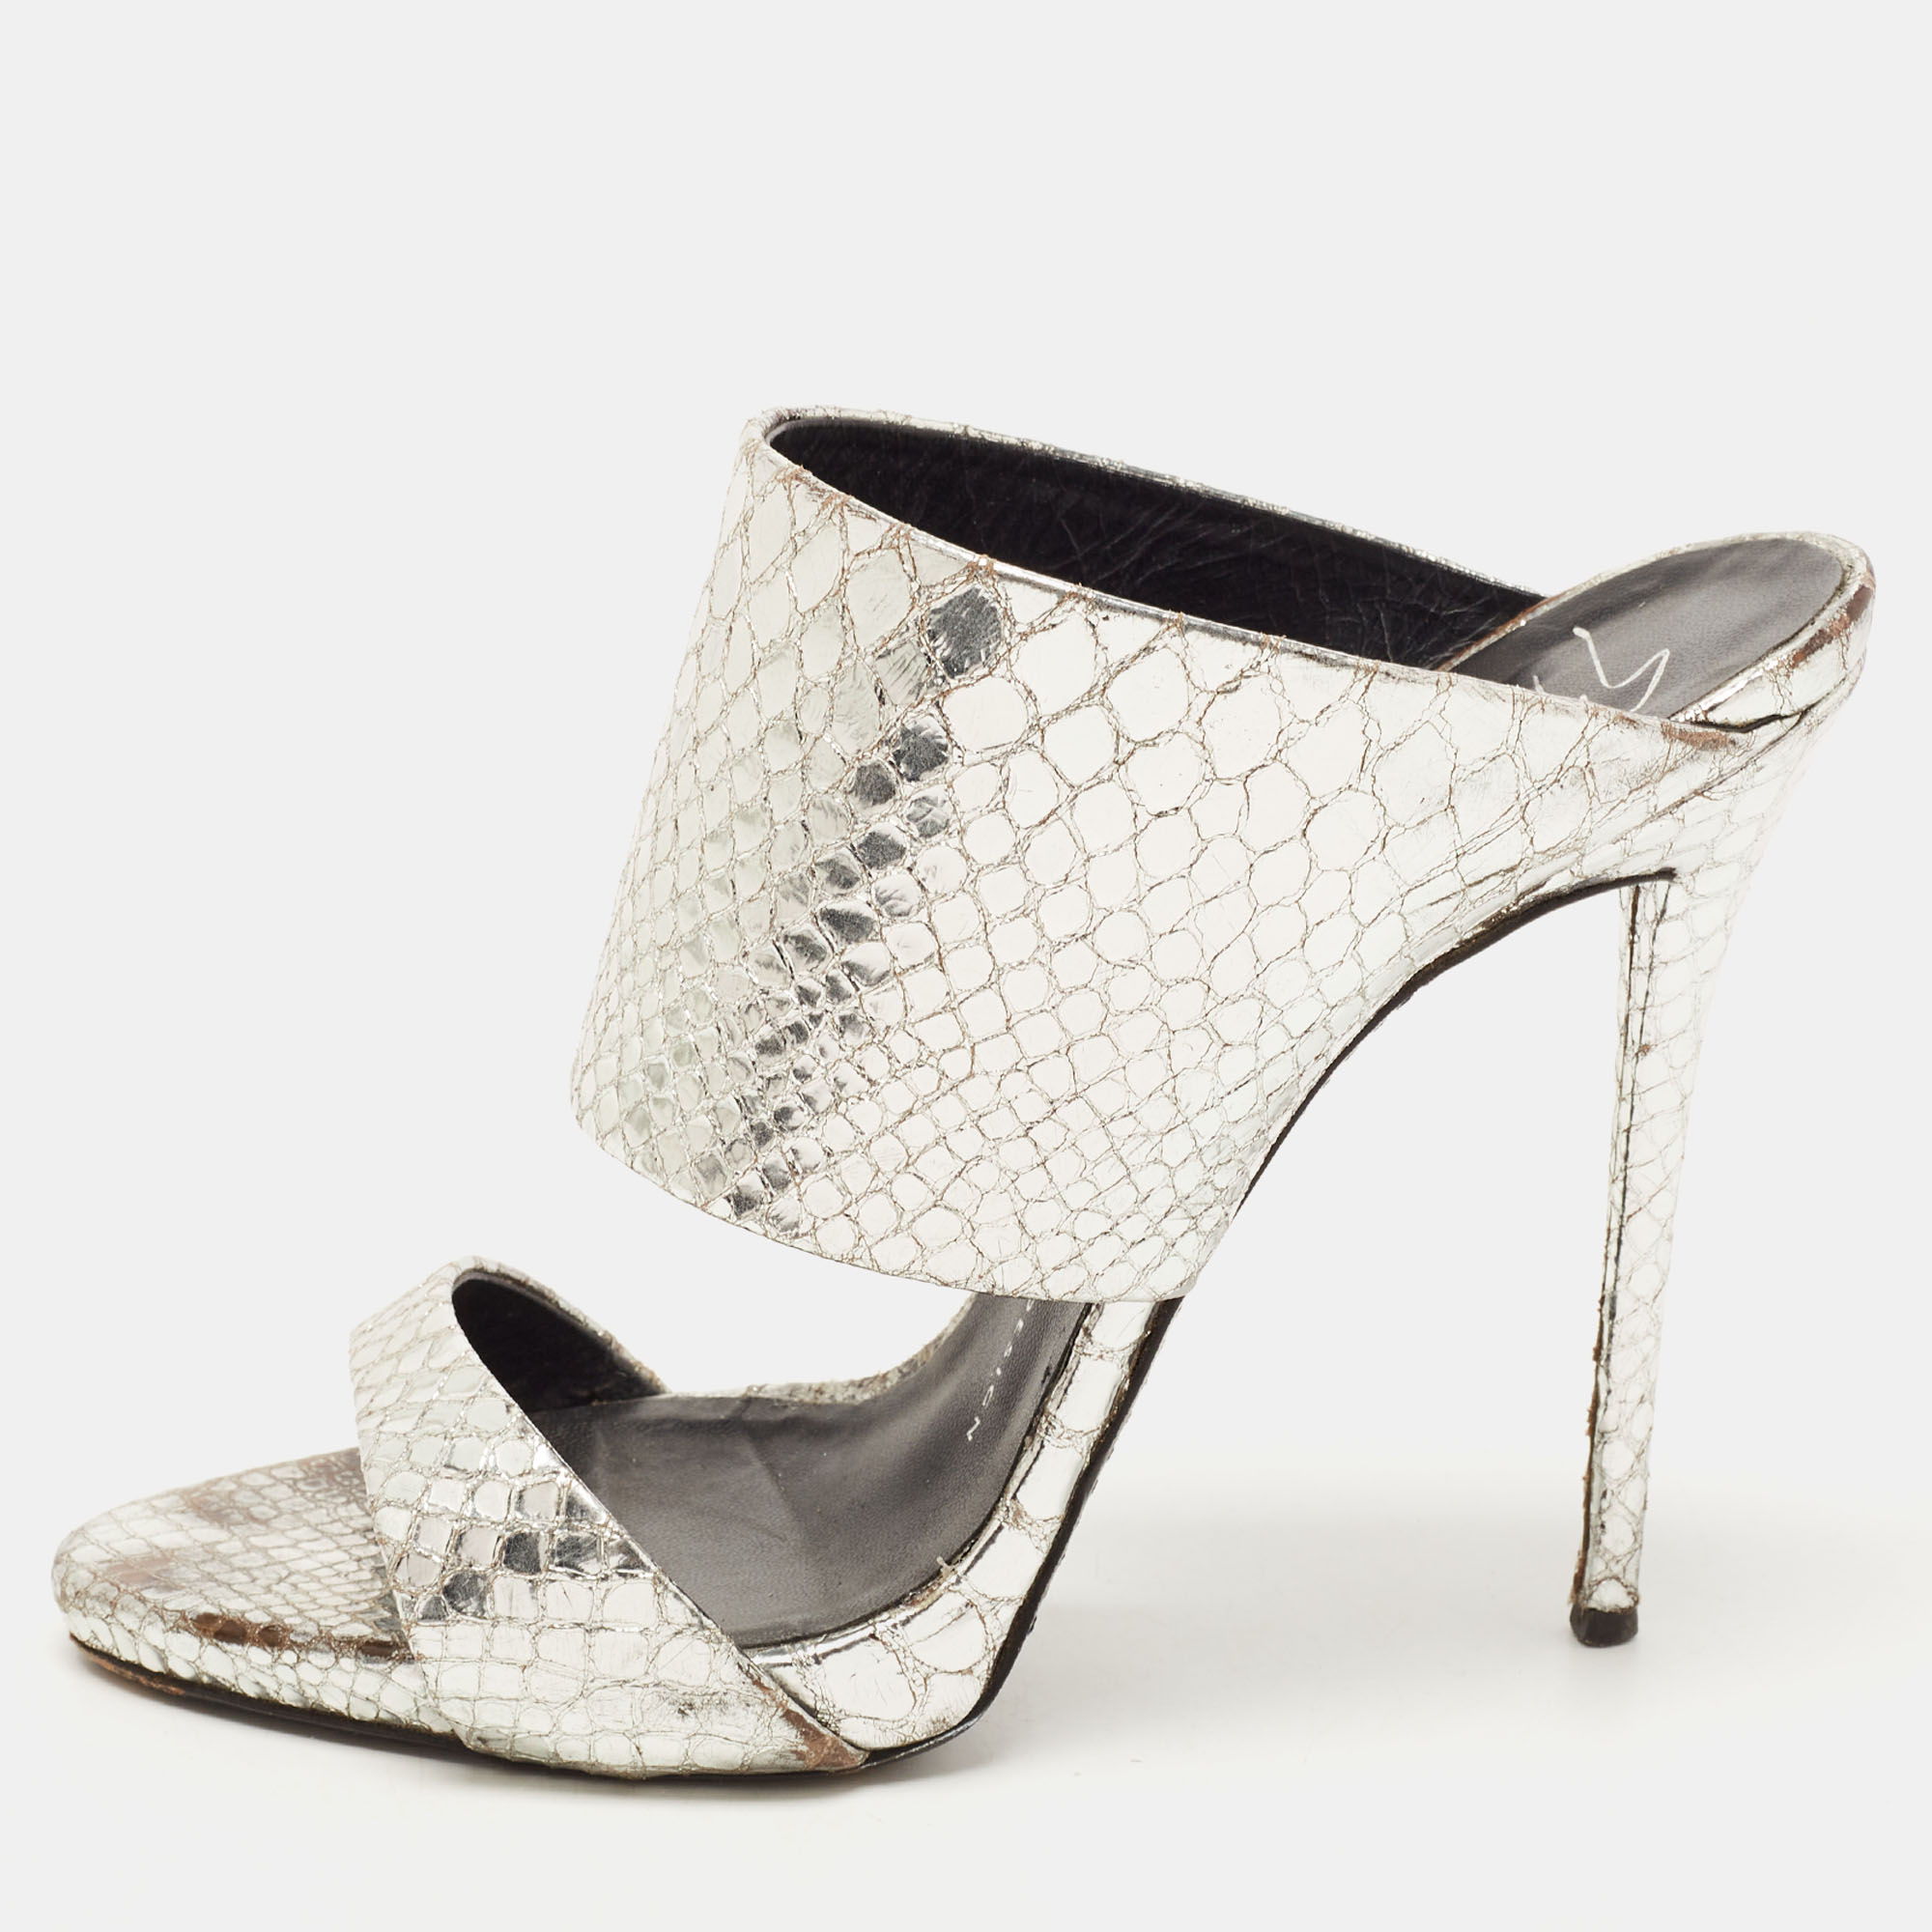 Giuseppe zanotti silver python embossed leather andrea sandals size 38.5